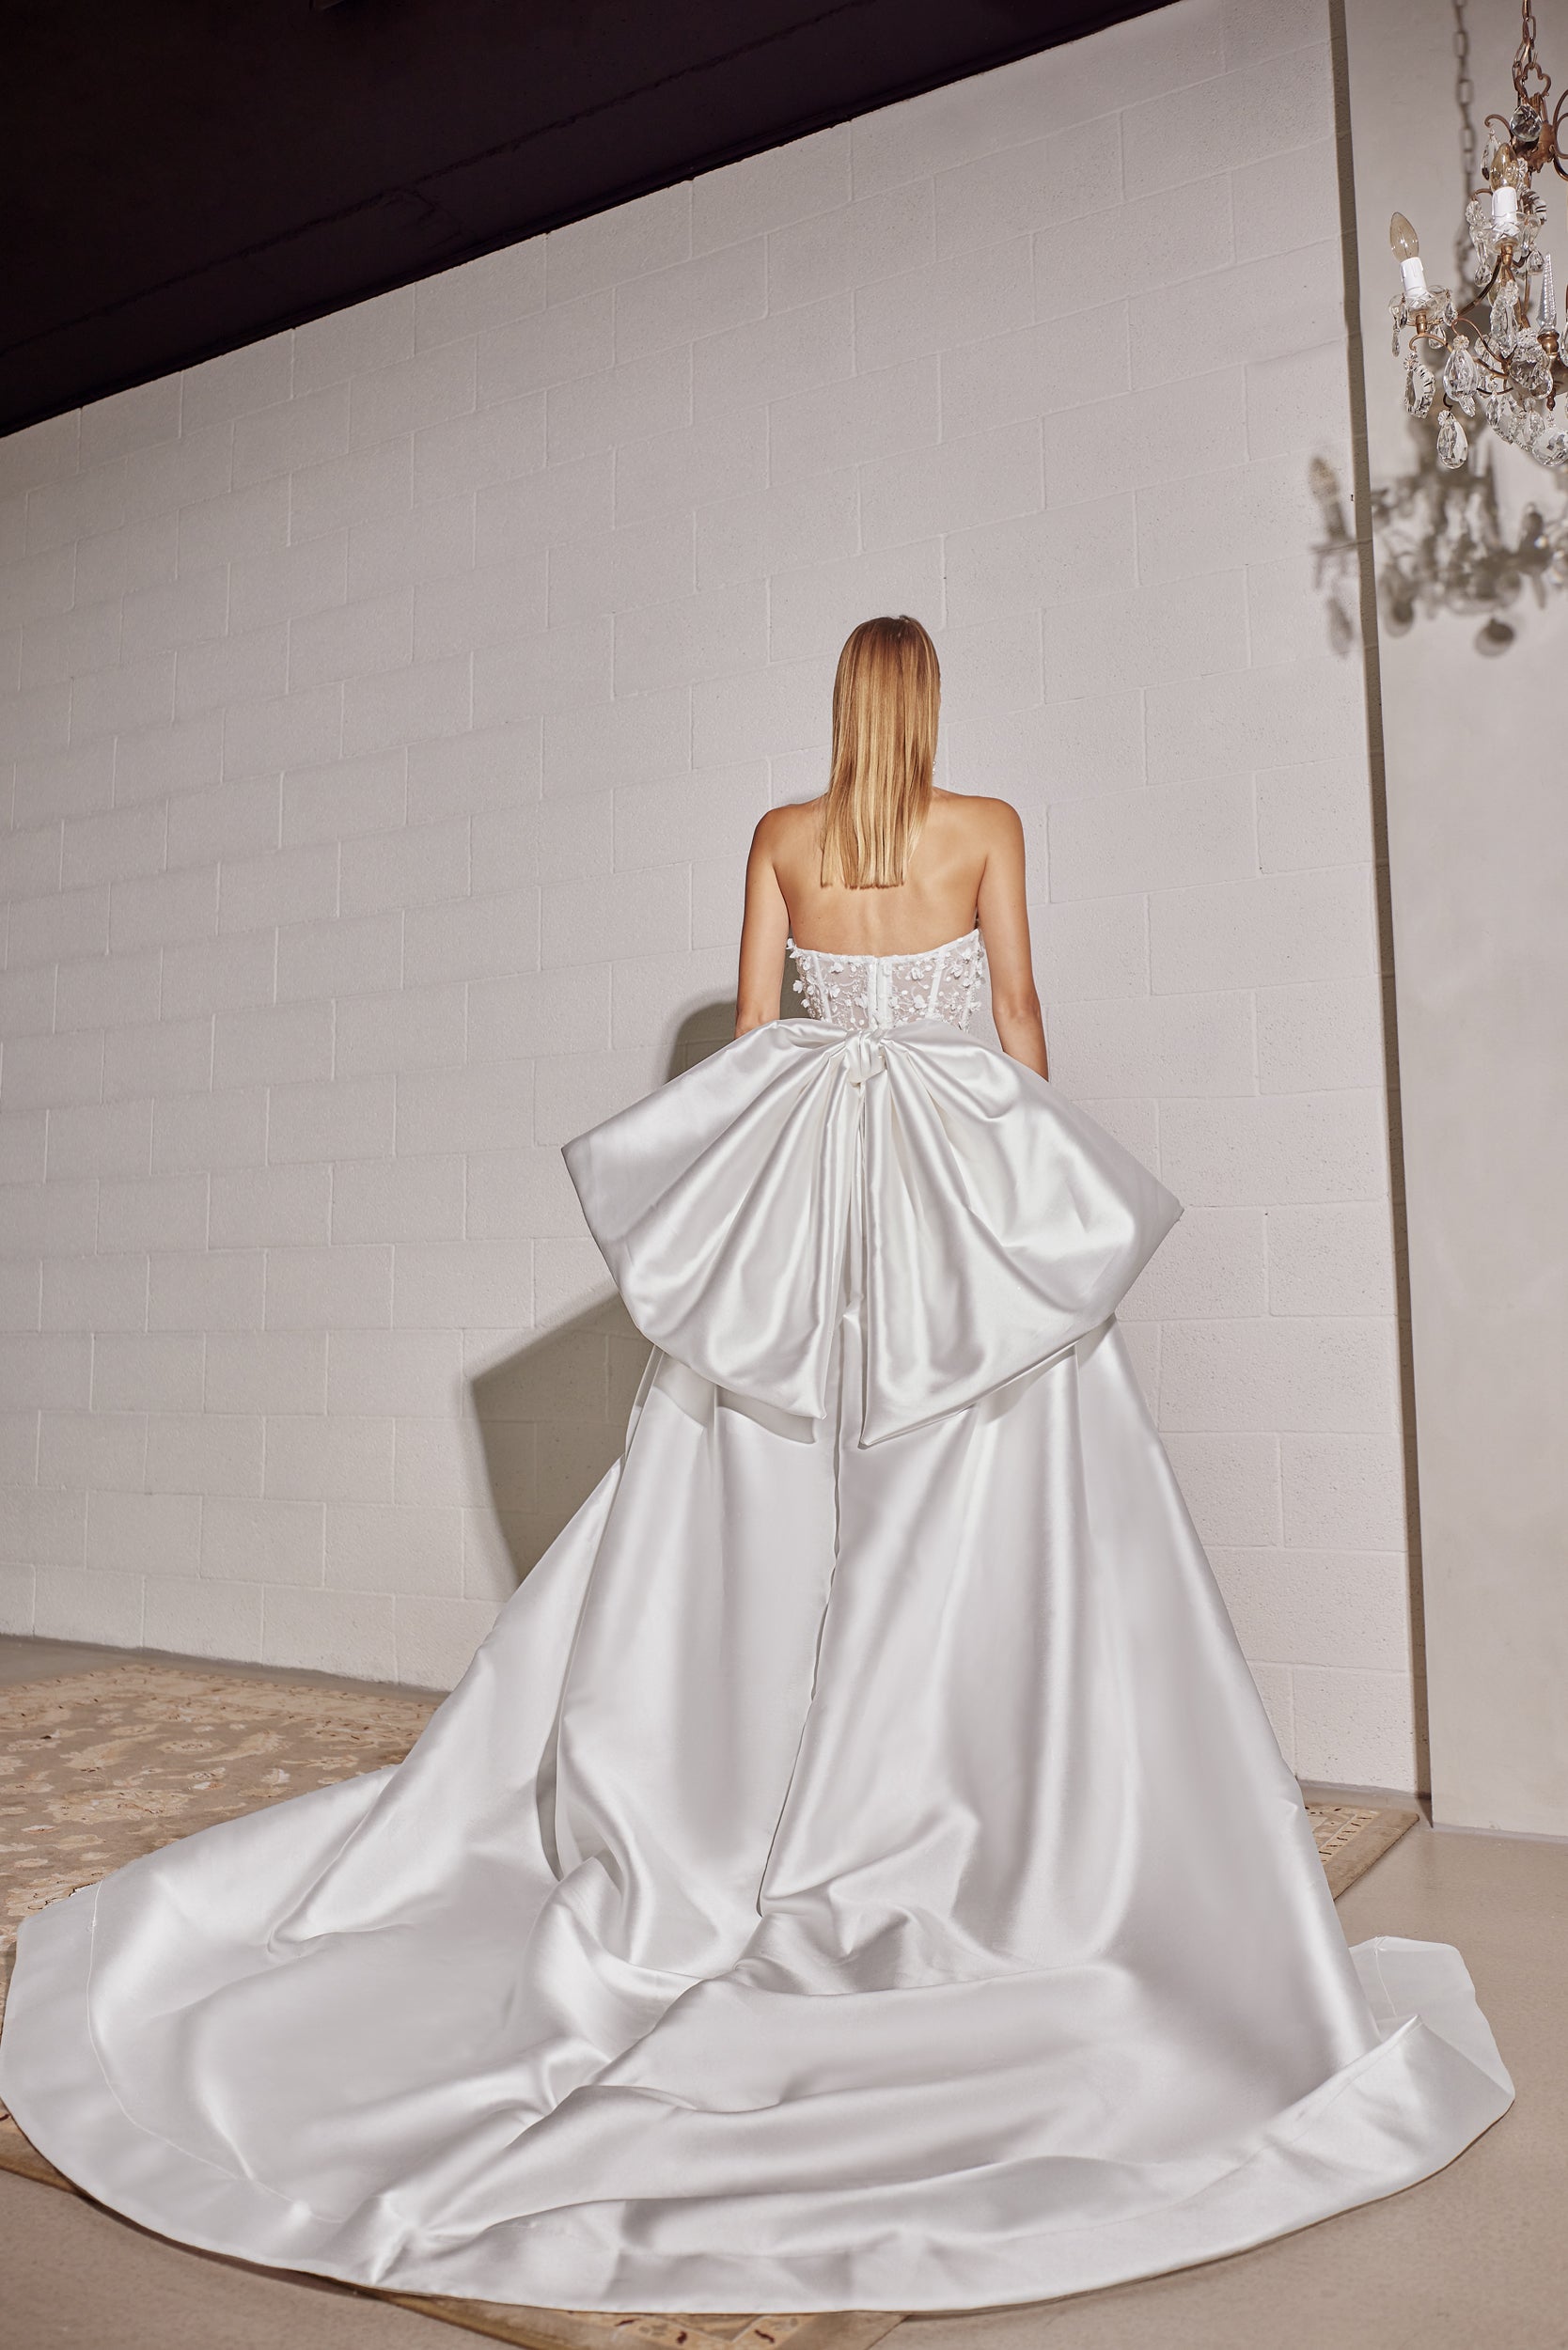 Dramatic Satin Overskirt With Bow by Tal Kedem Bridal Couture - Image 2